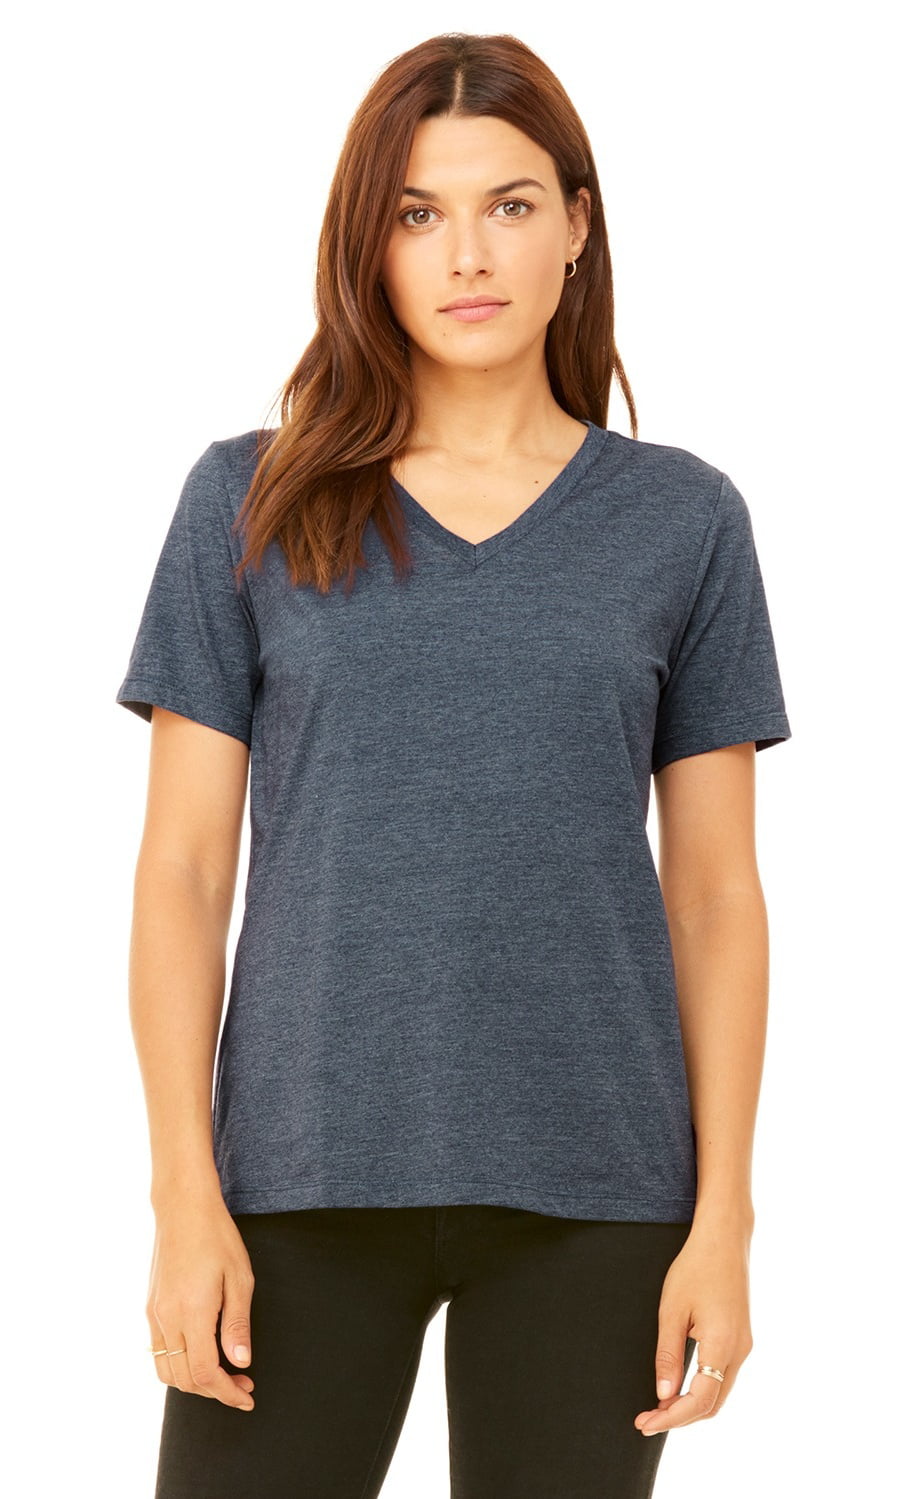 BELLA+CANVAS - The Bella + Canvas Ladies Relaxed Jersey Short Sleeve V ...